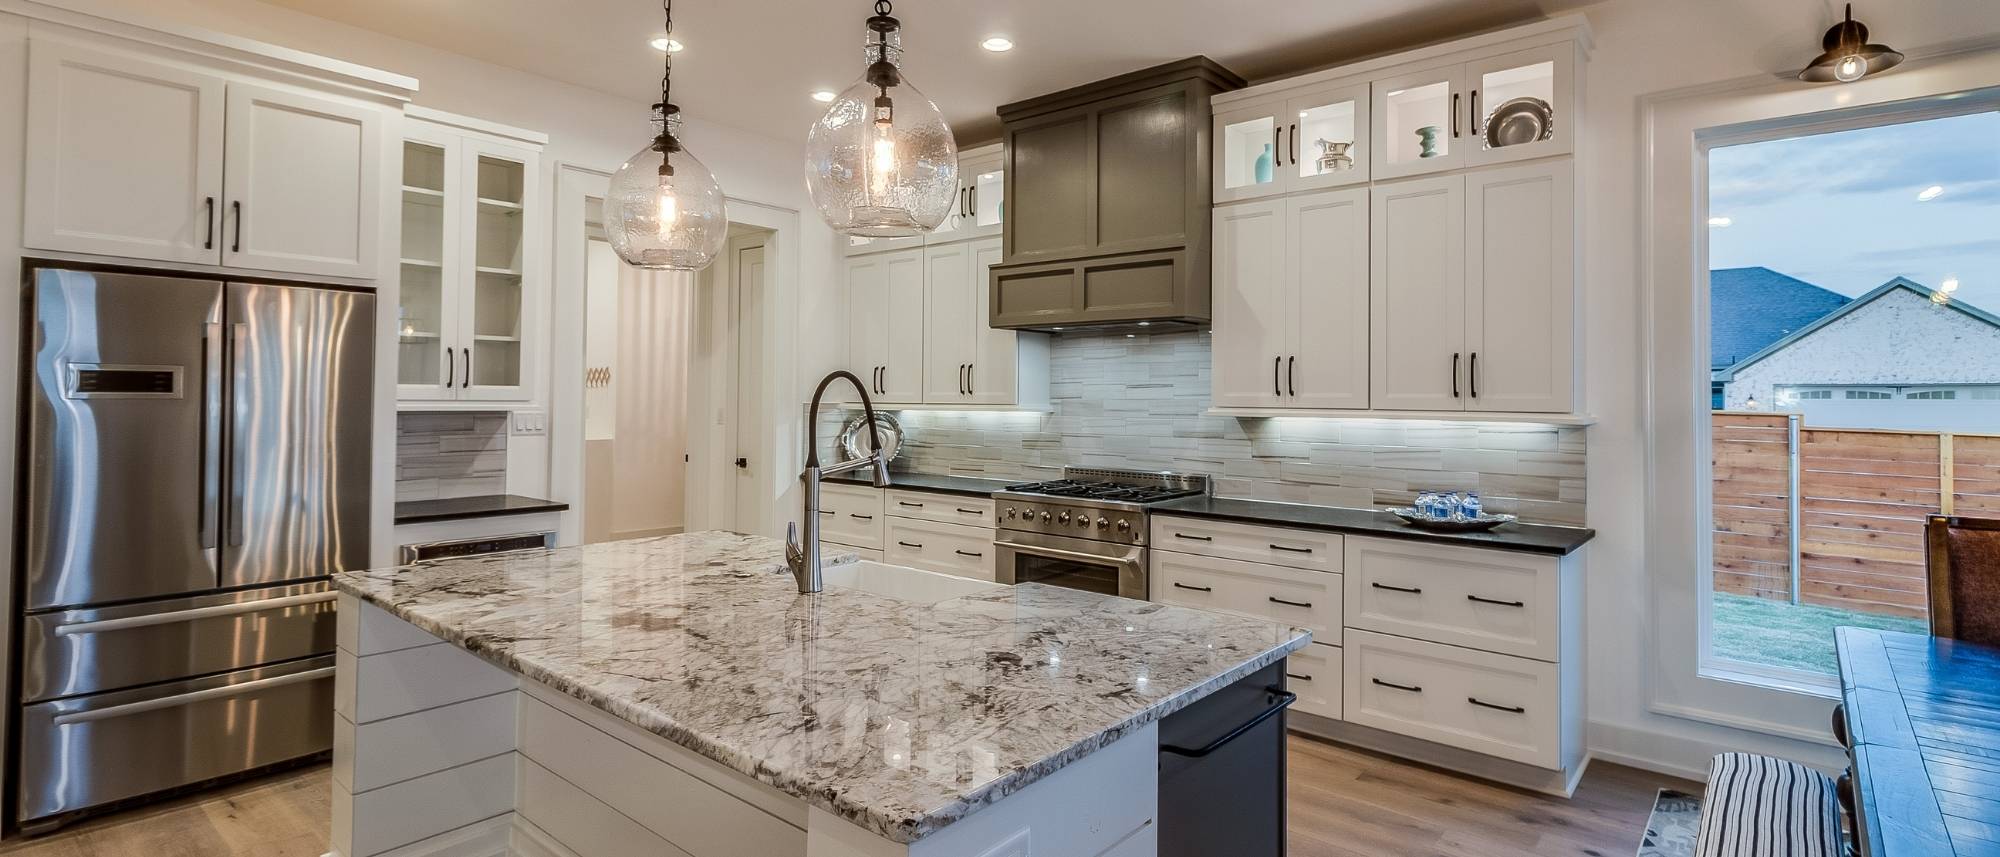 The Pros And Cons Of Granite Countertops, Pros And Cons Of Granite Countertops In Bathrooms